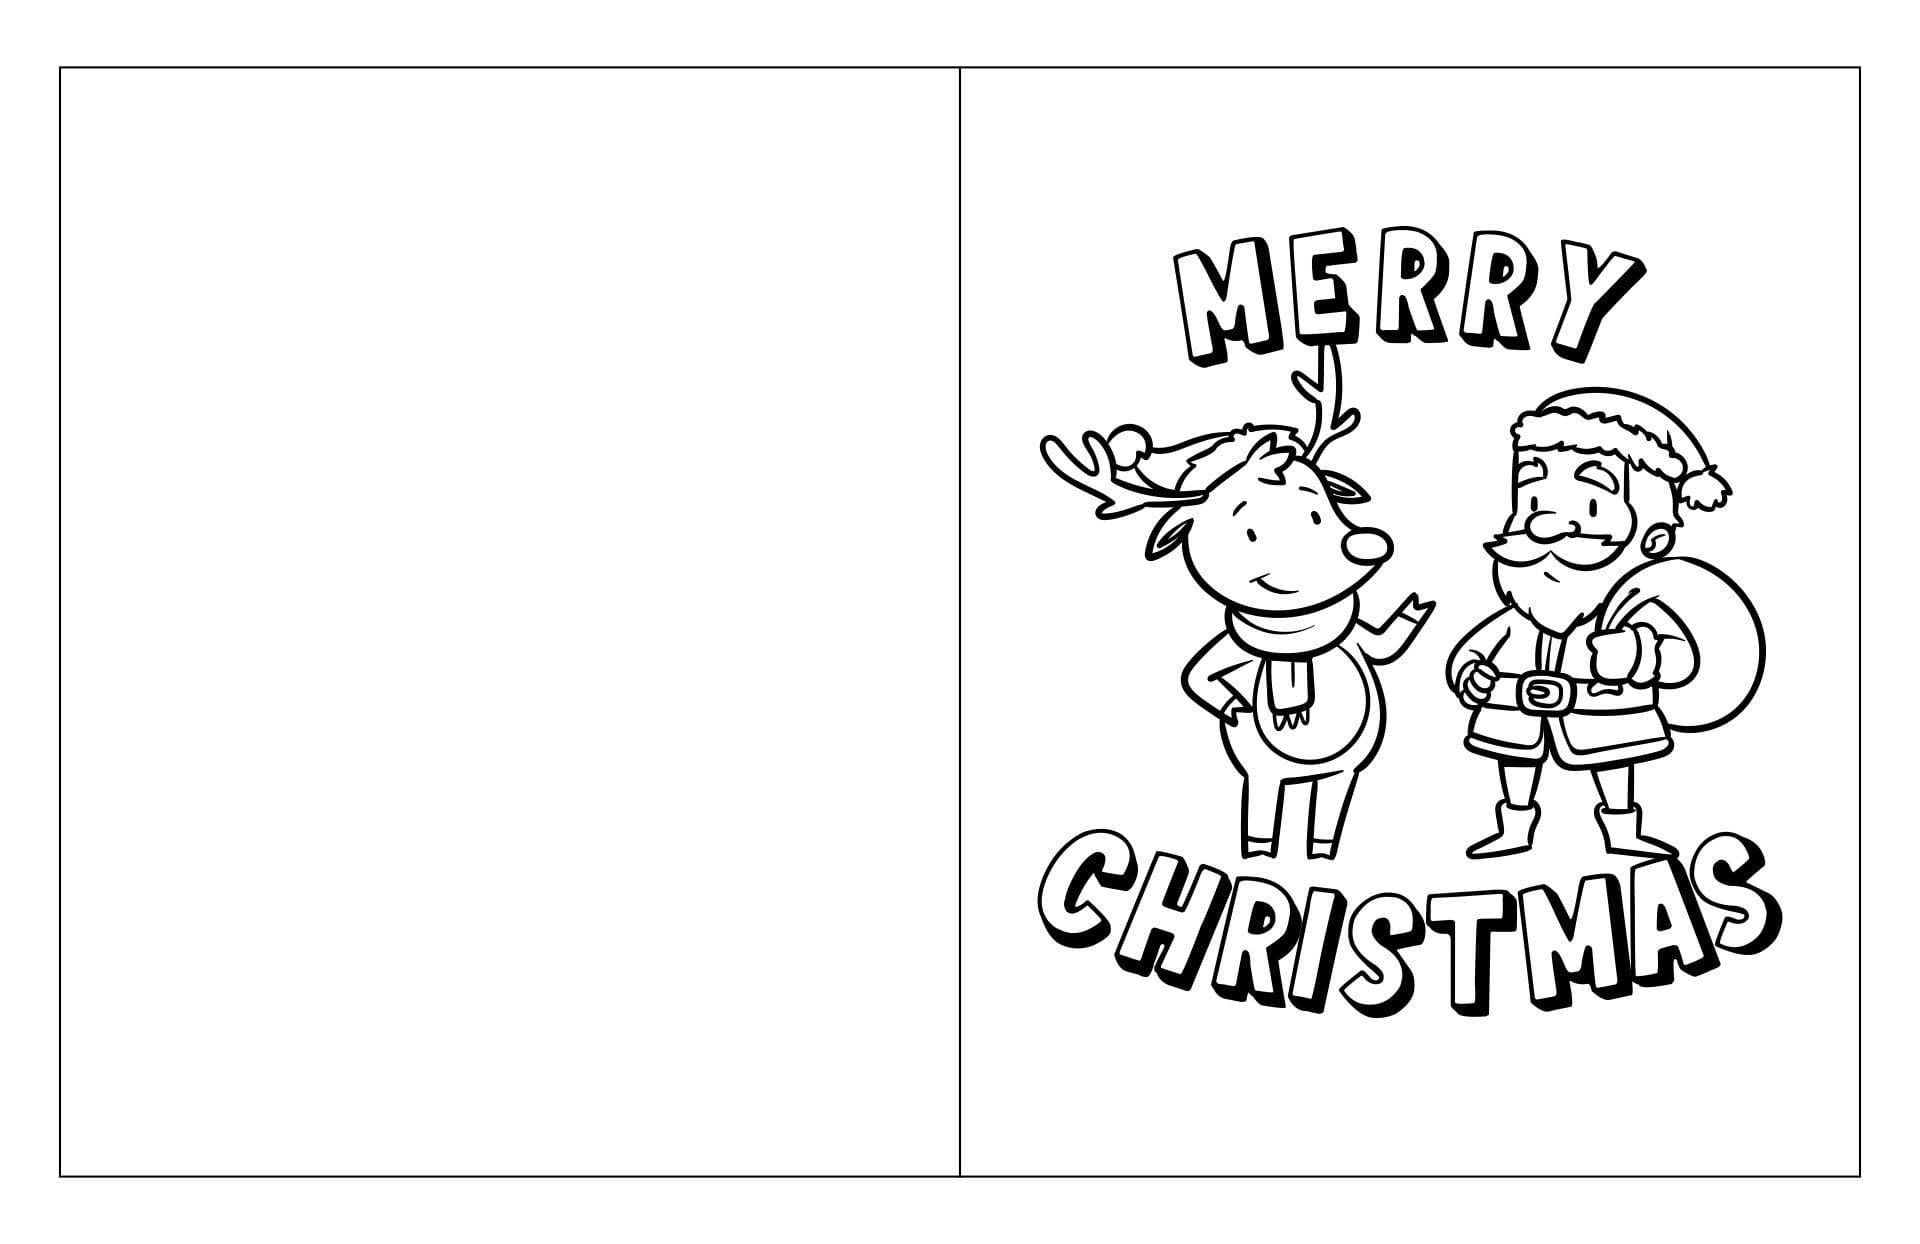 Merry Christmas Card coloring page - Download, Print or Color Online ...